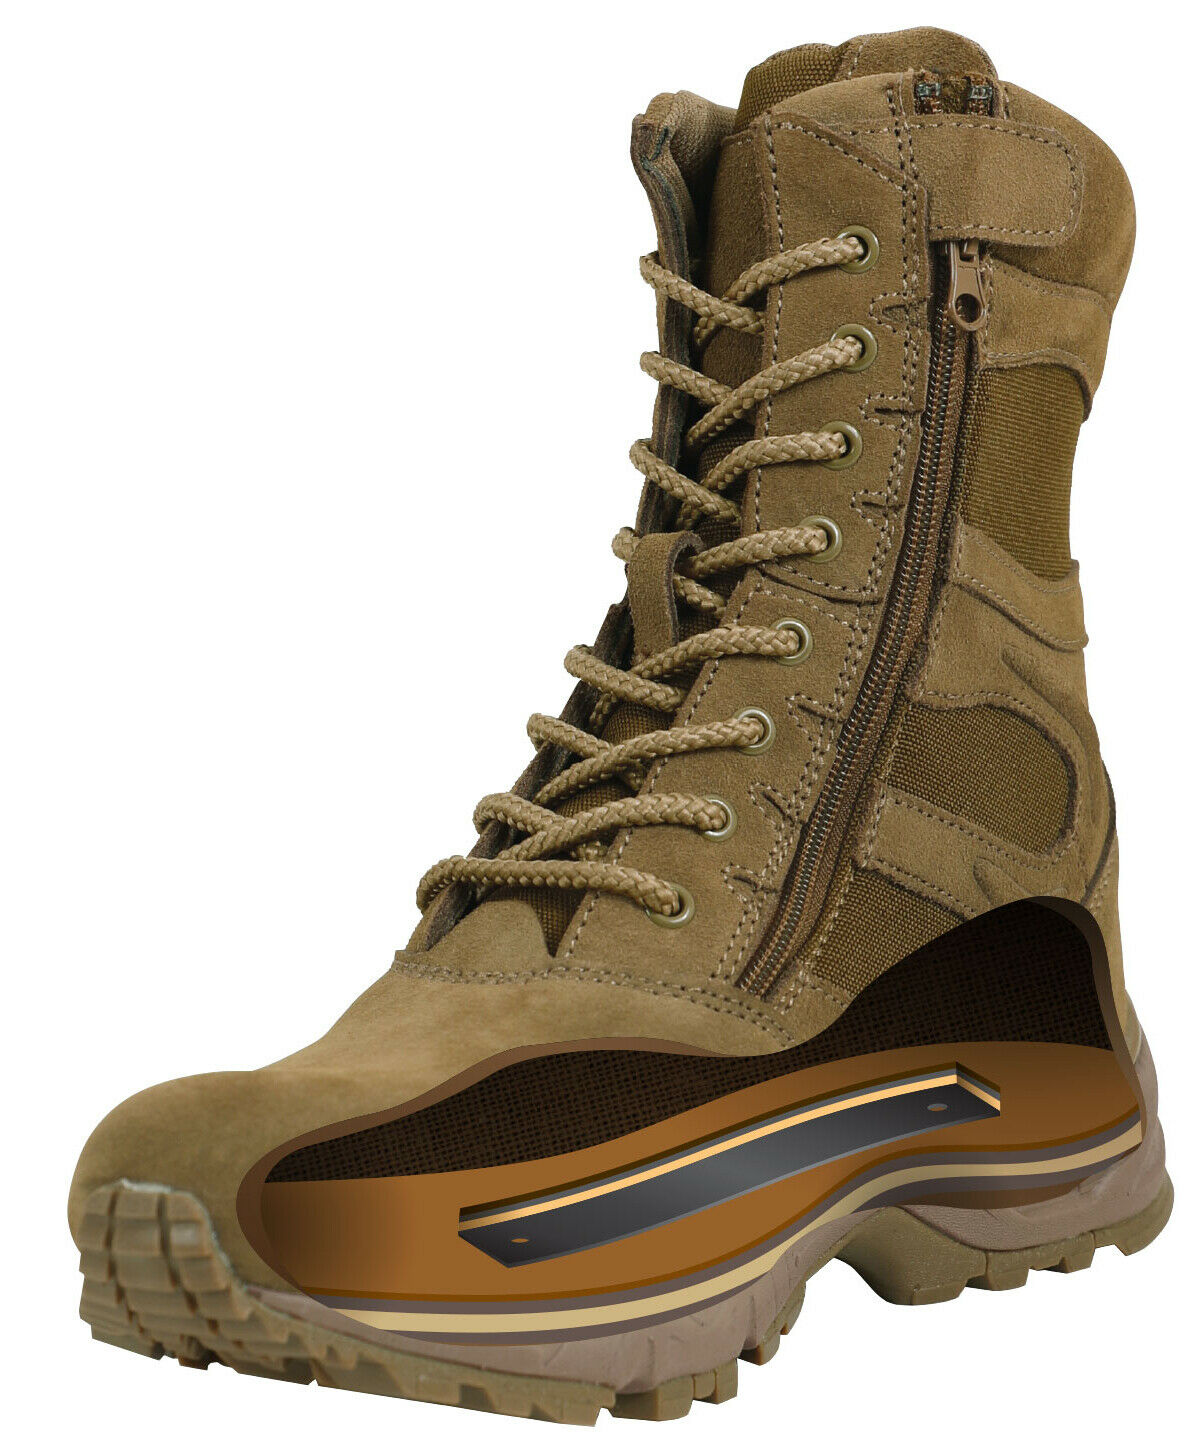 Rothco Forced Entry Deployment Boots With Side Zipper - 8 Inch - Coyote Brown AR-671